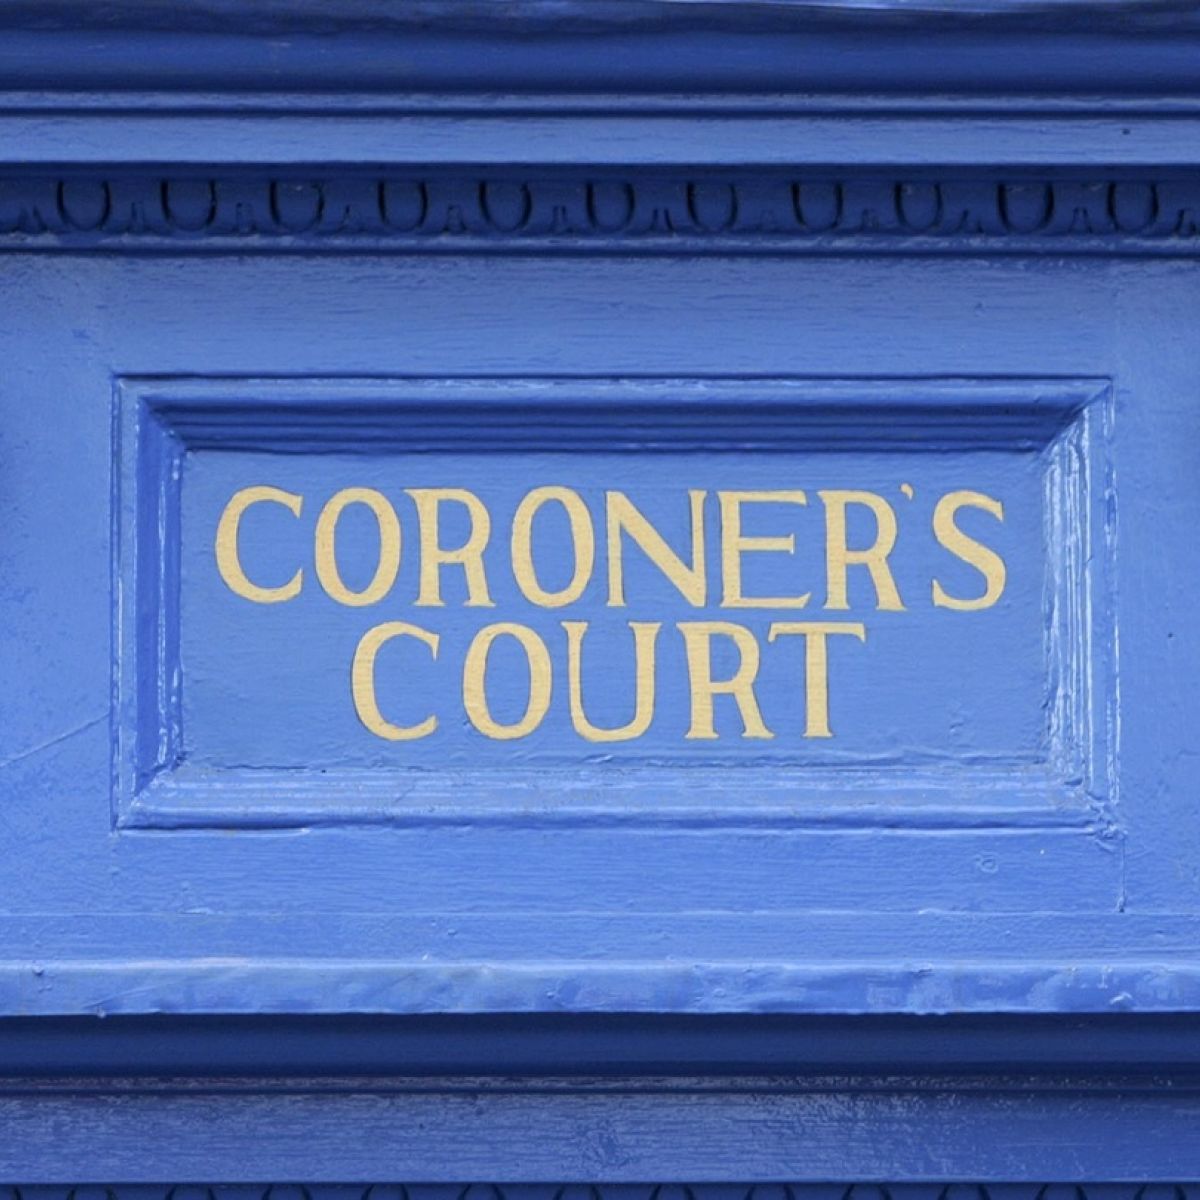 Dead Body Found After Maggots Came Through Roof Inquest Told